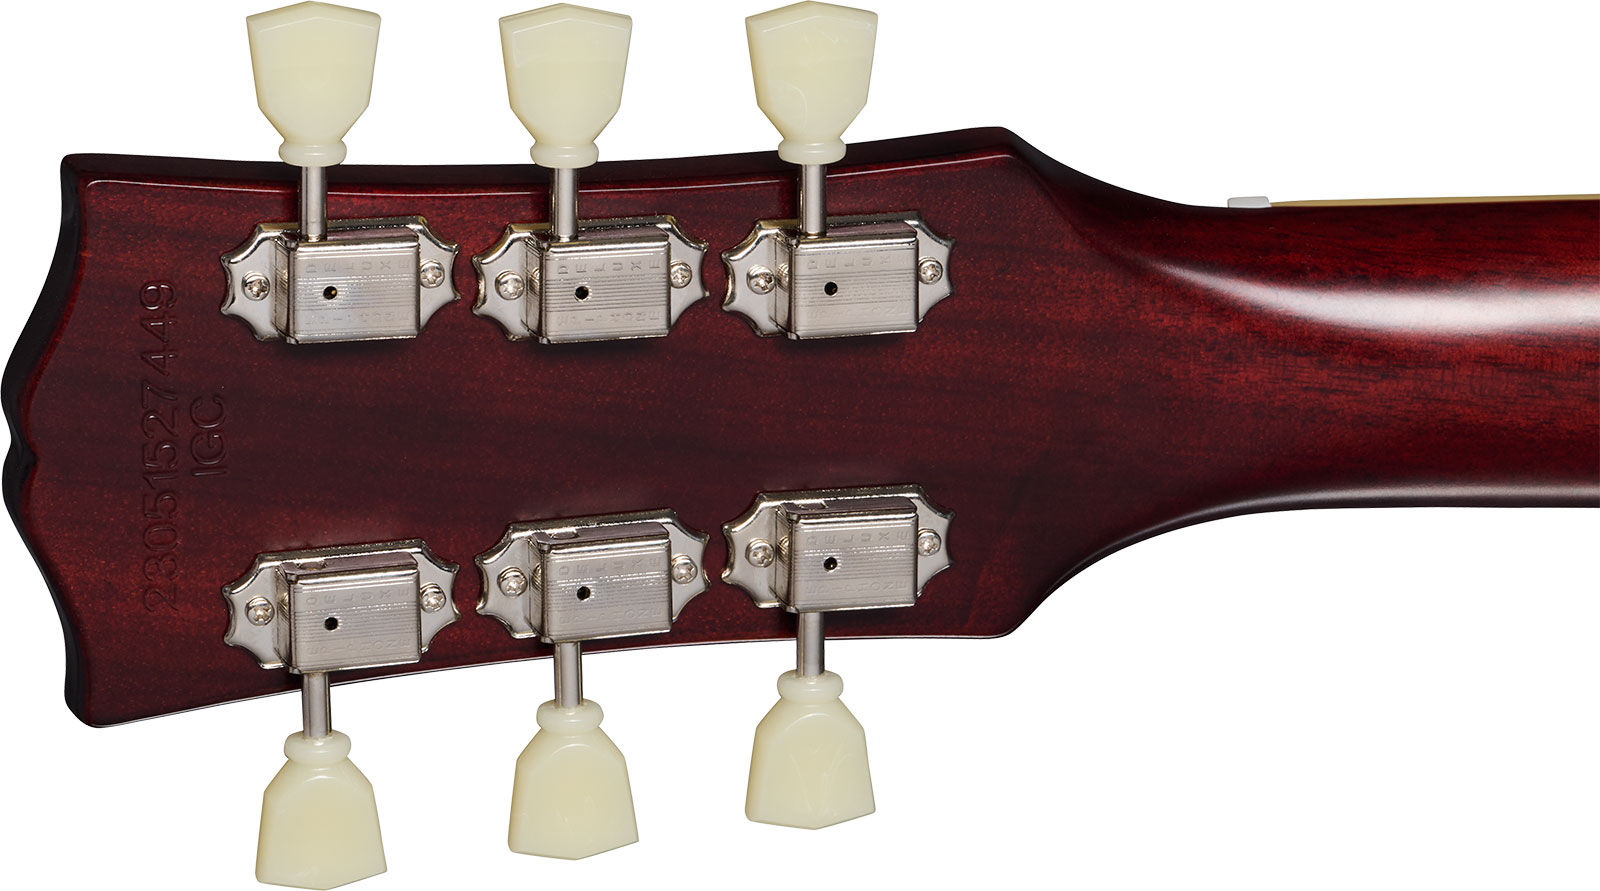 Epiphone 1959 Les Paul Standard Inspired By 2h Gibson Ht Lau - Vos Tobacco Burst - Single cut electric guitar - Variation 4